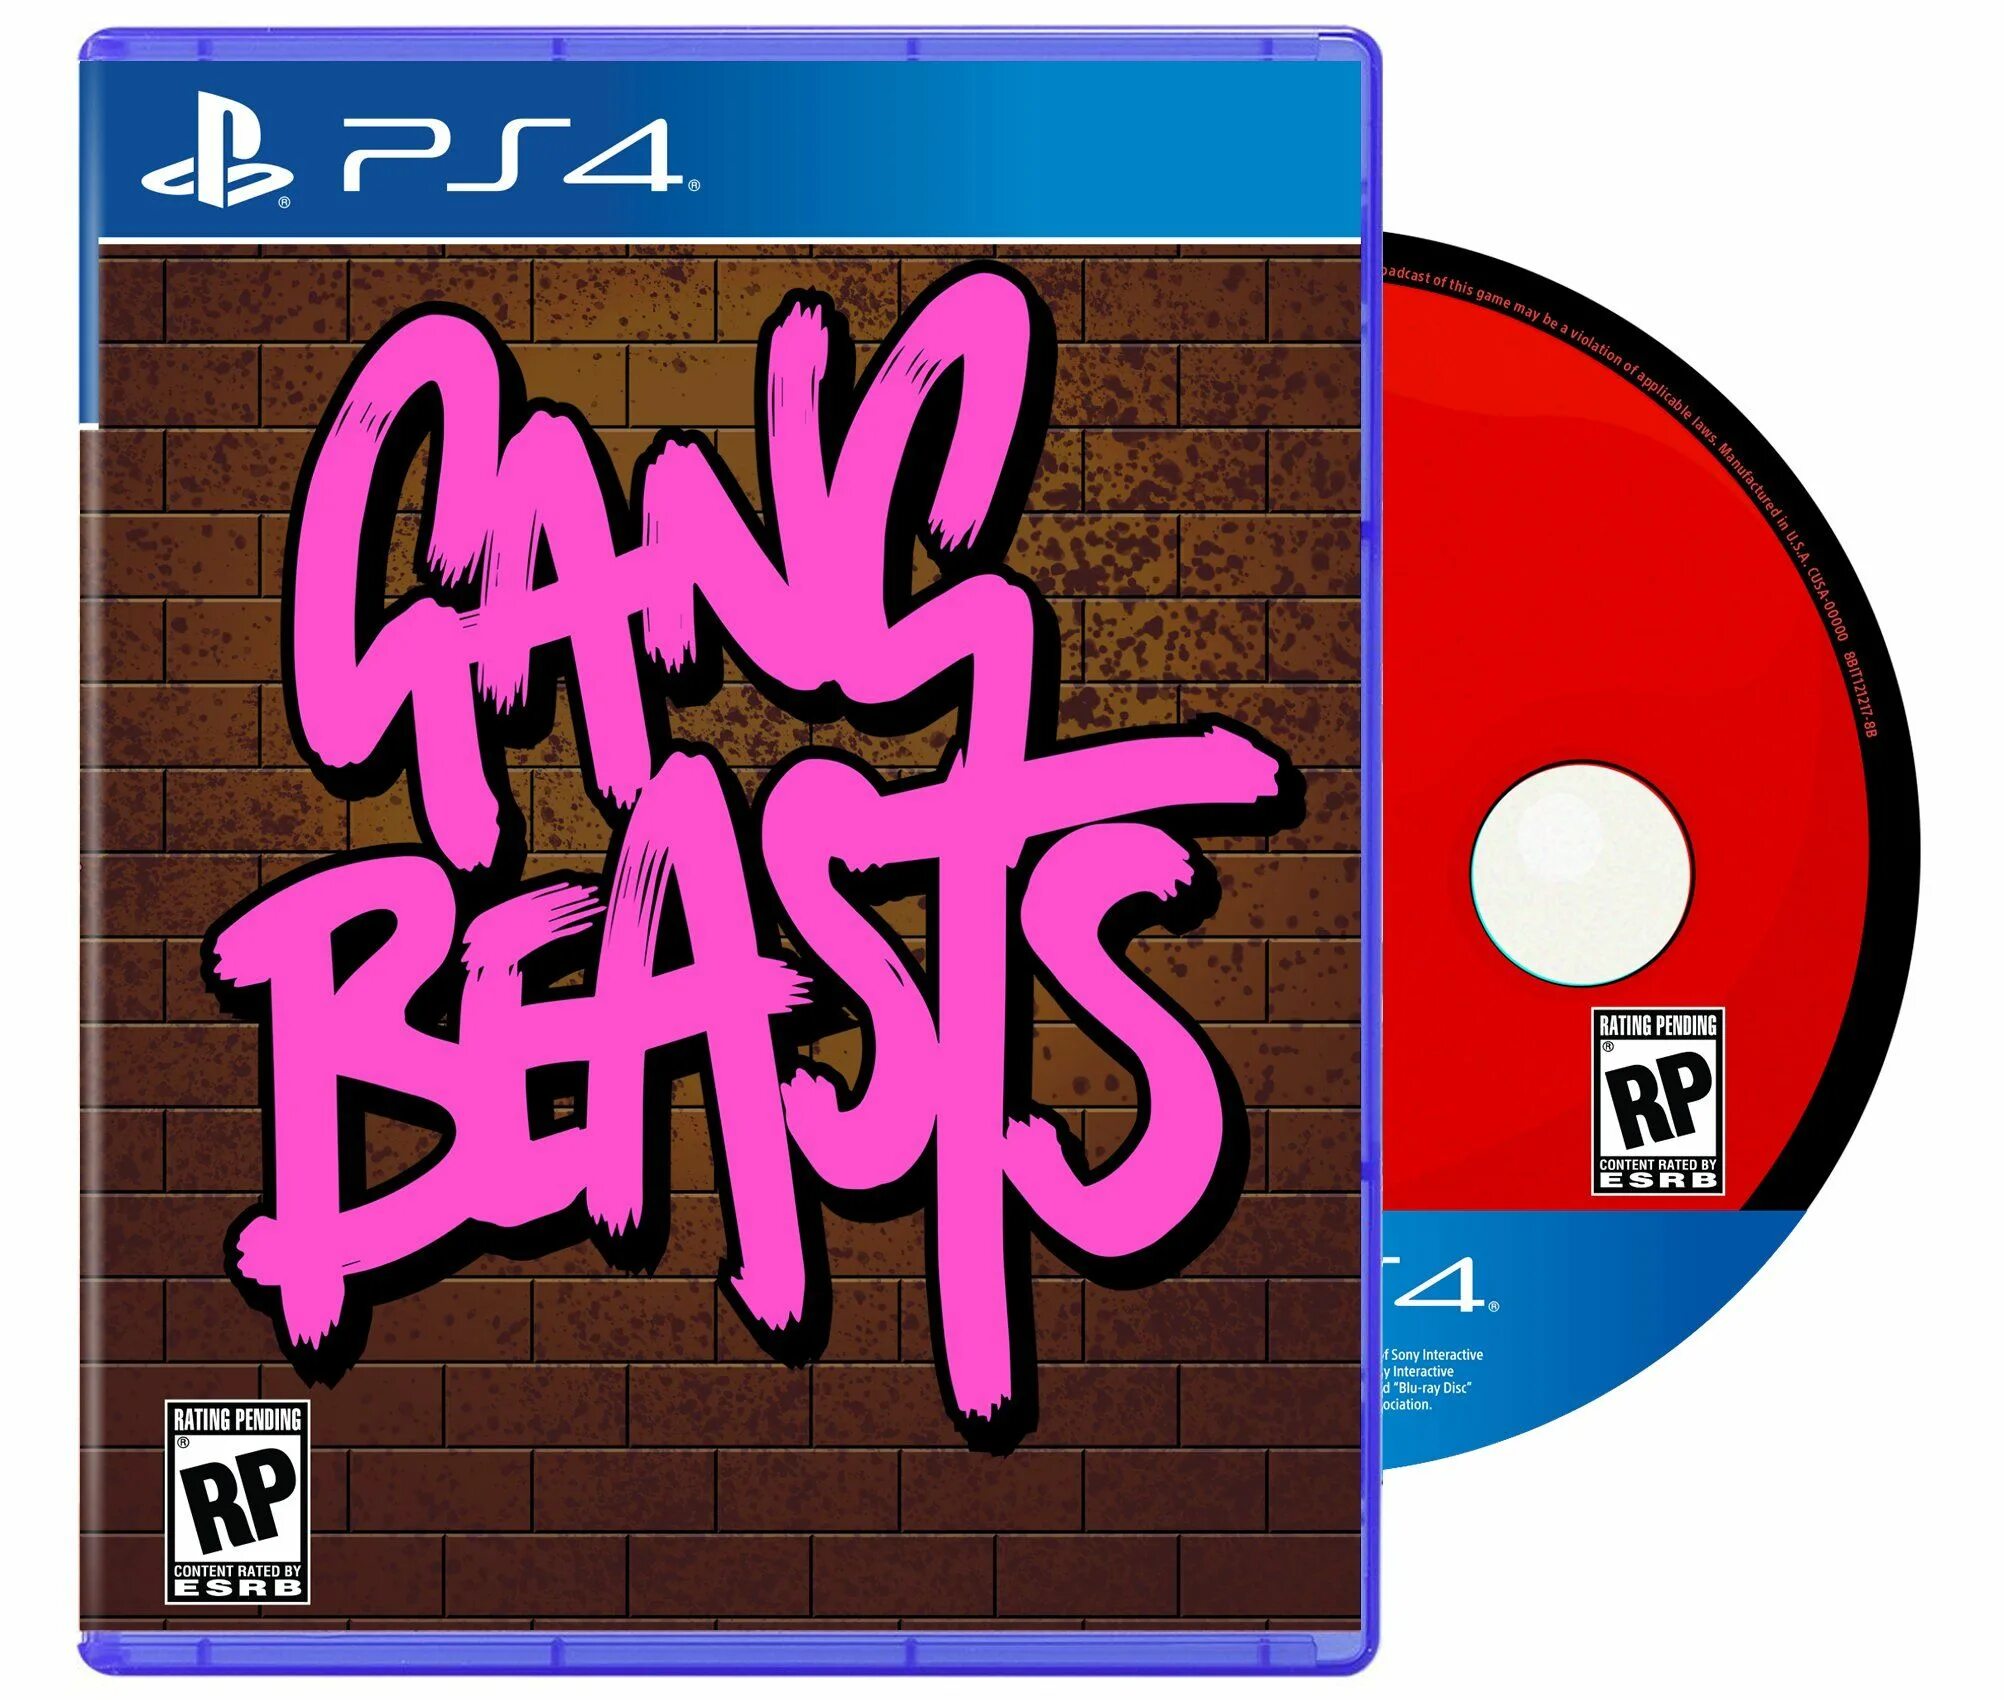 Beasts ps4. Gang Beasts ps4 диск. ПС 4 ганг Бист диск. Gang Beasts (ps4). Gang Beasts на пс4.